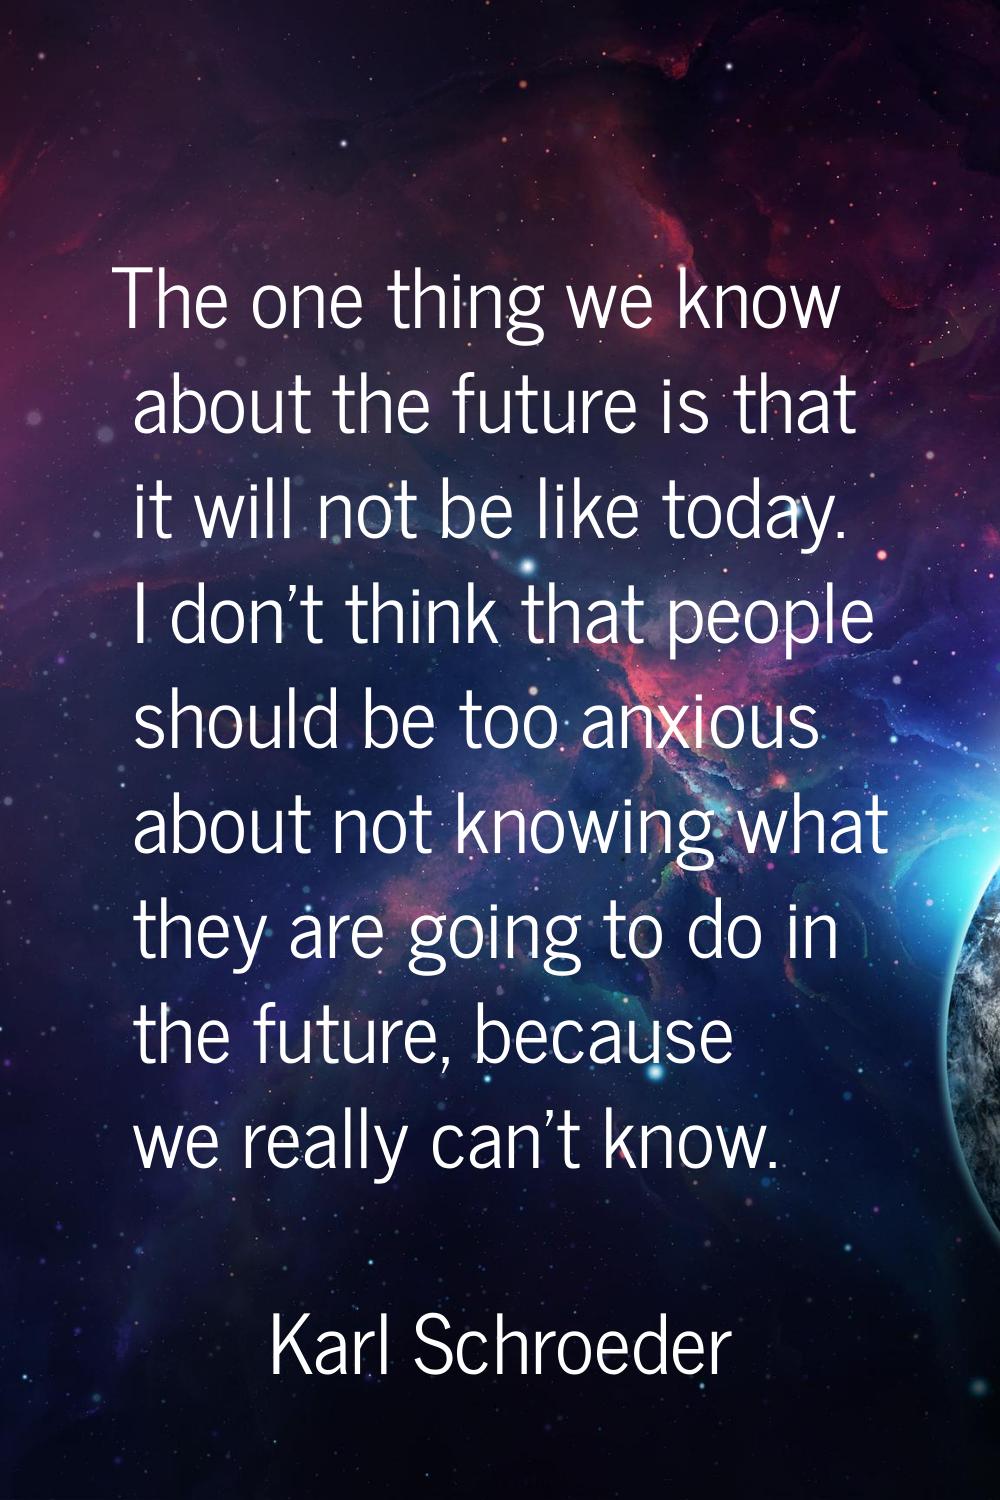 The one thing we know about the future is that it will not be like today. I don't think that people